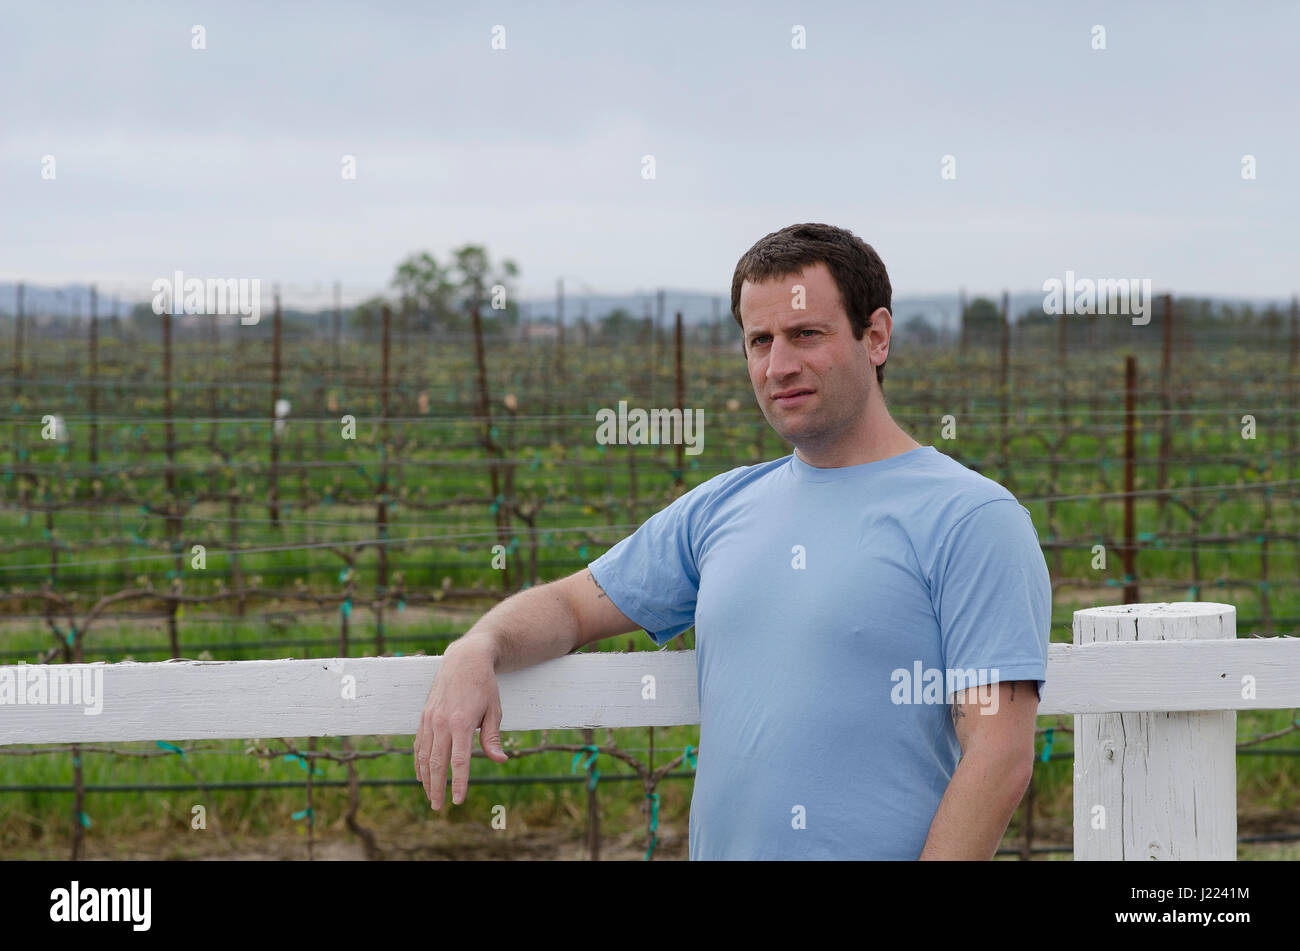 Man relaxing outside in a vineyard. Hopeful for tomorrow. Stock Photo